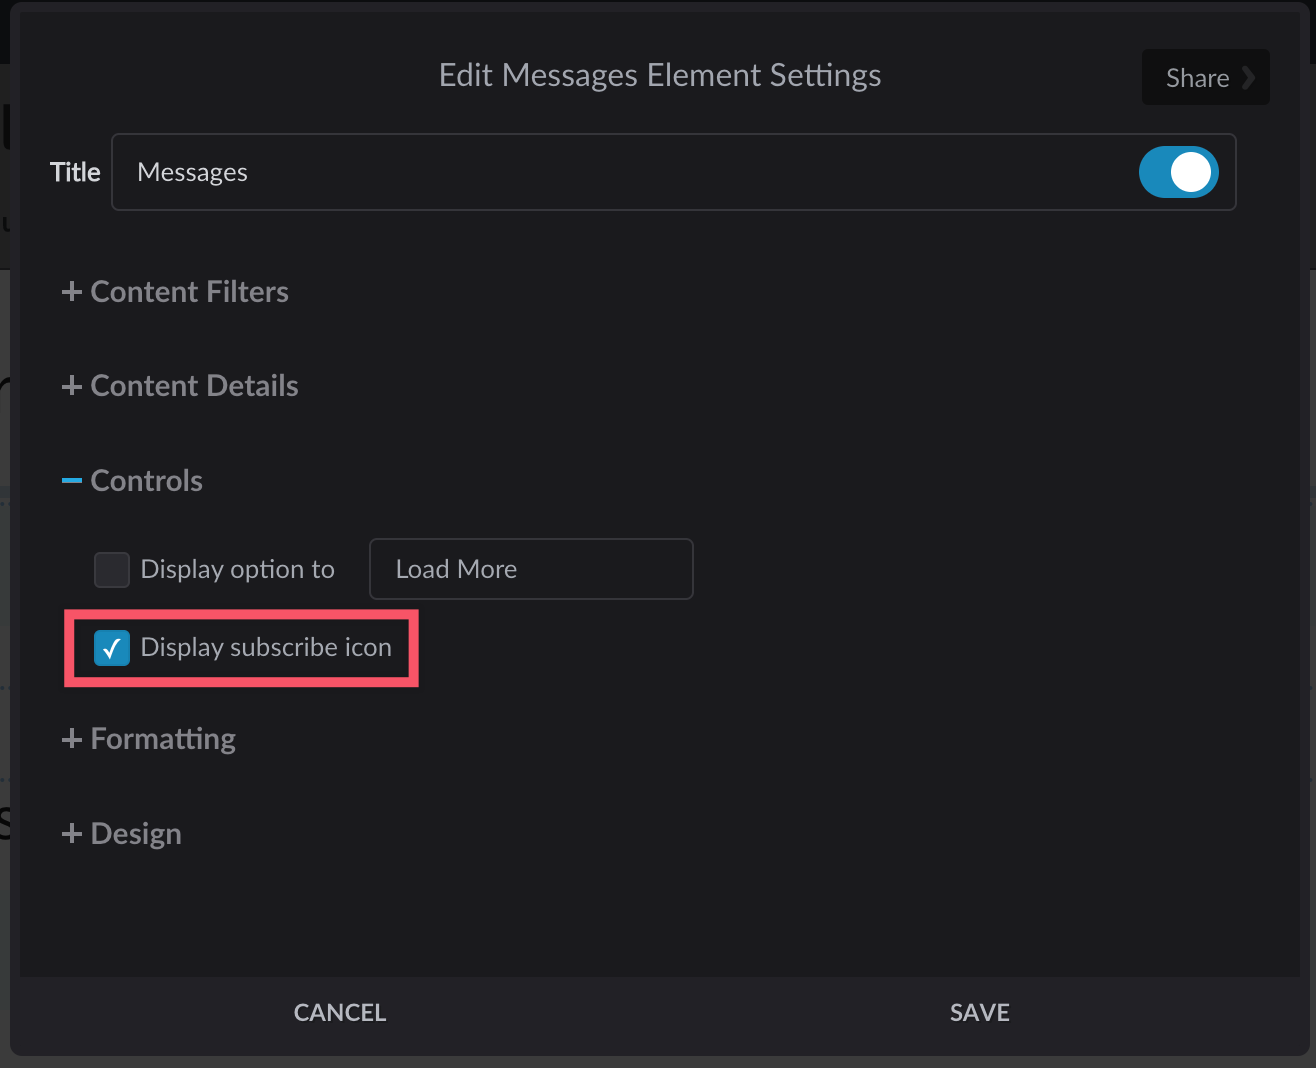 Messages element settings with Display subscribe icon highlighted